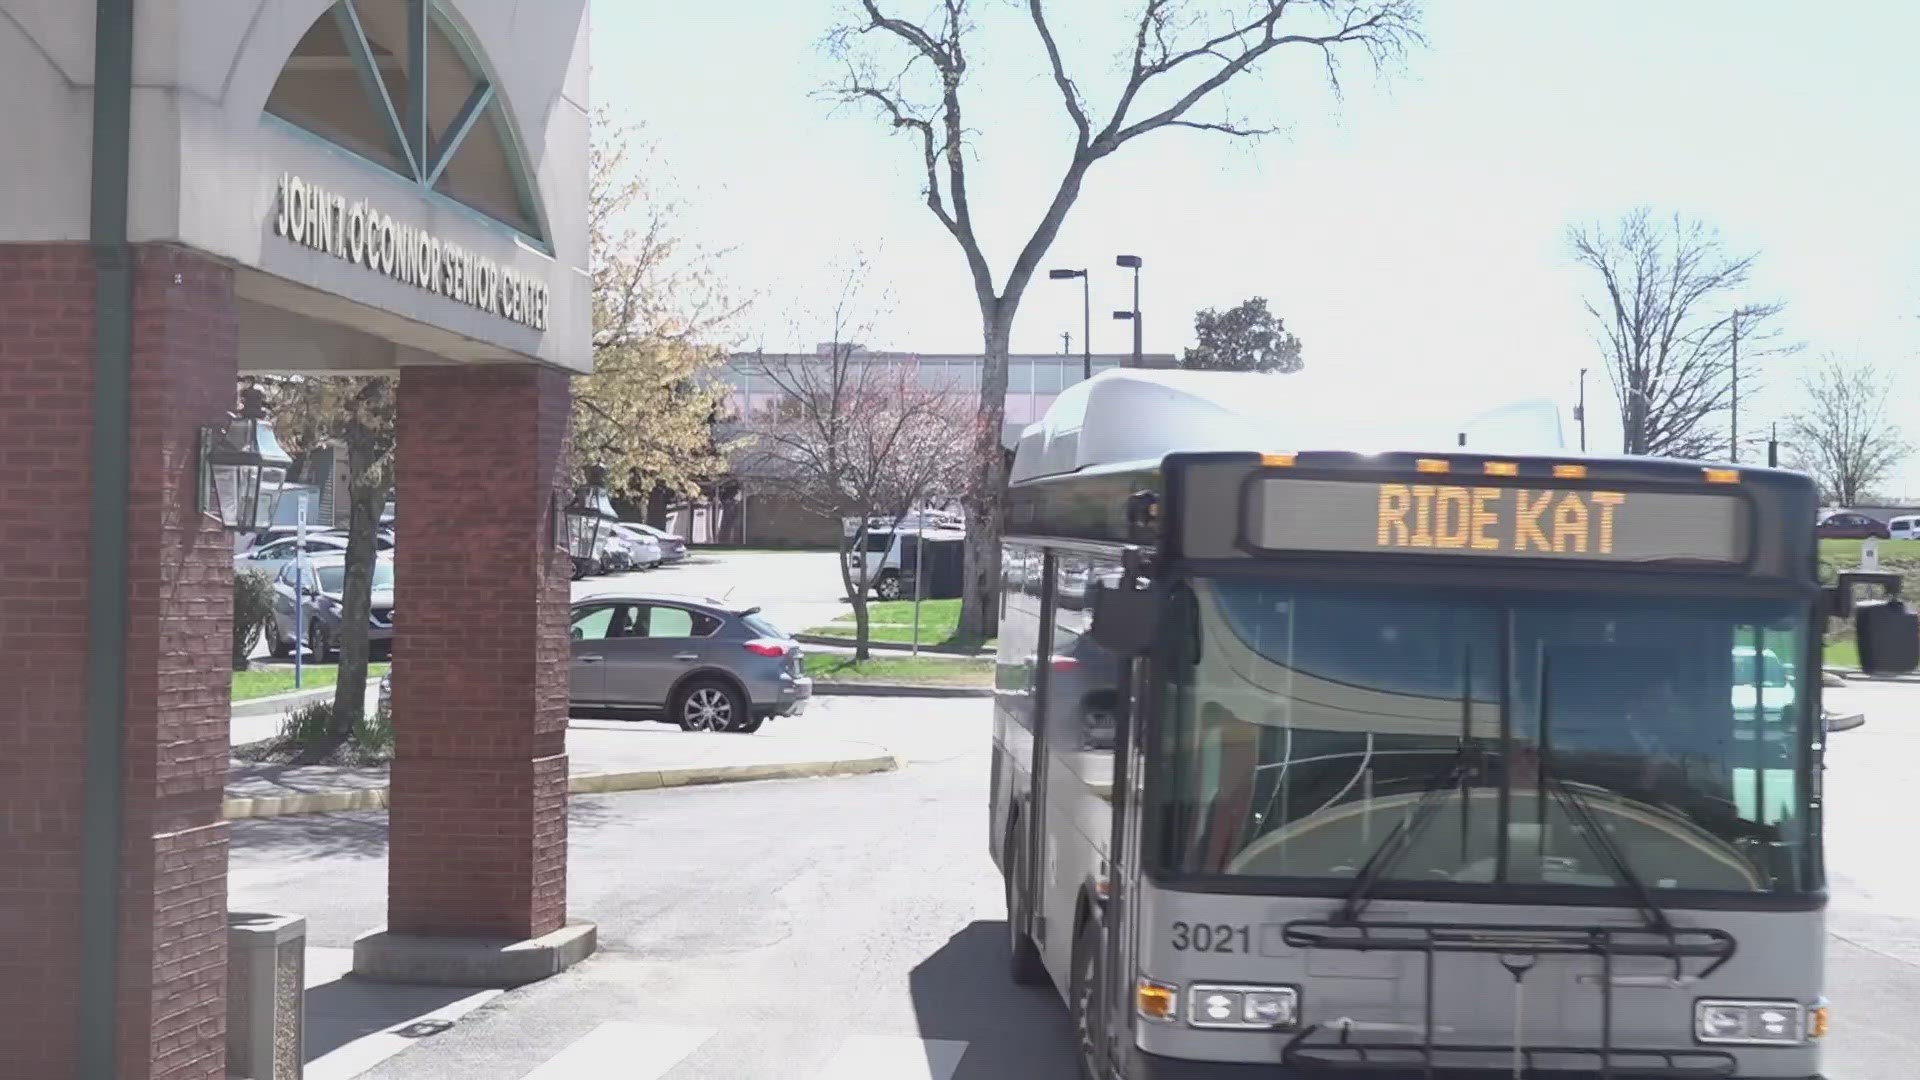 KAT plan would remove bus from O'Connor Senior Center |